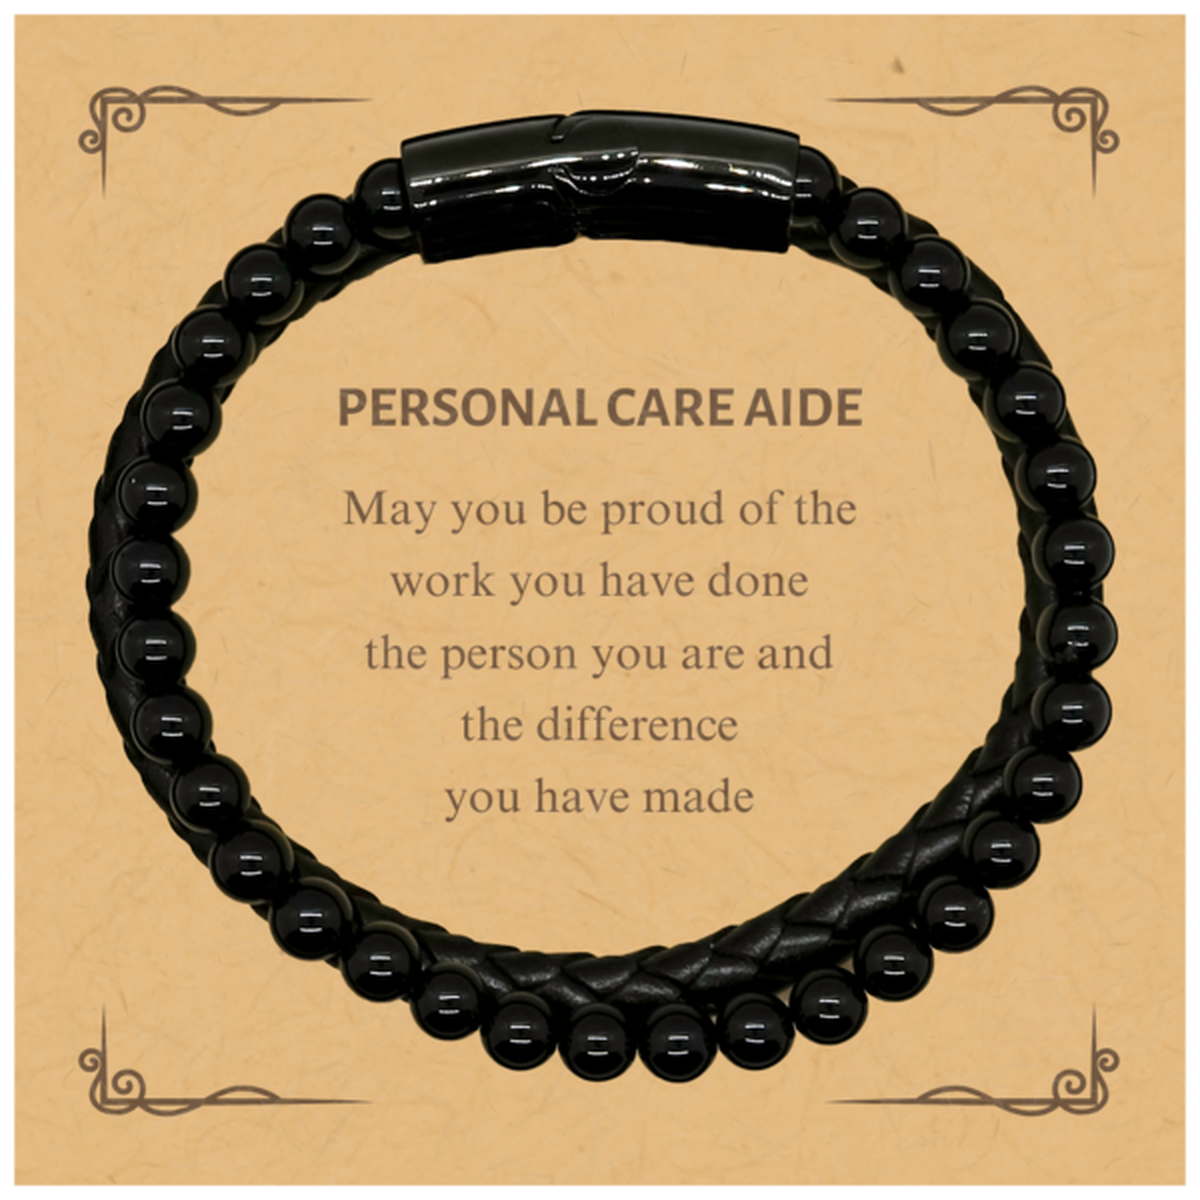 Personal Care Aide May you be proud of the work you have done, Retirement Personal Care Aide Stone Leather Bracelets for Colleague Appreciation Gifts Amazing for Personal Care Aide